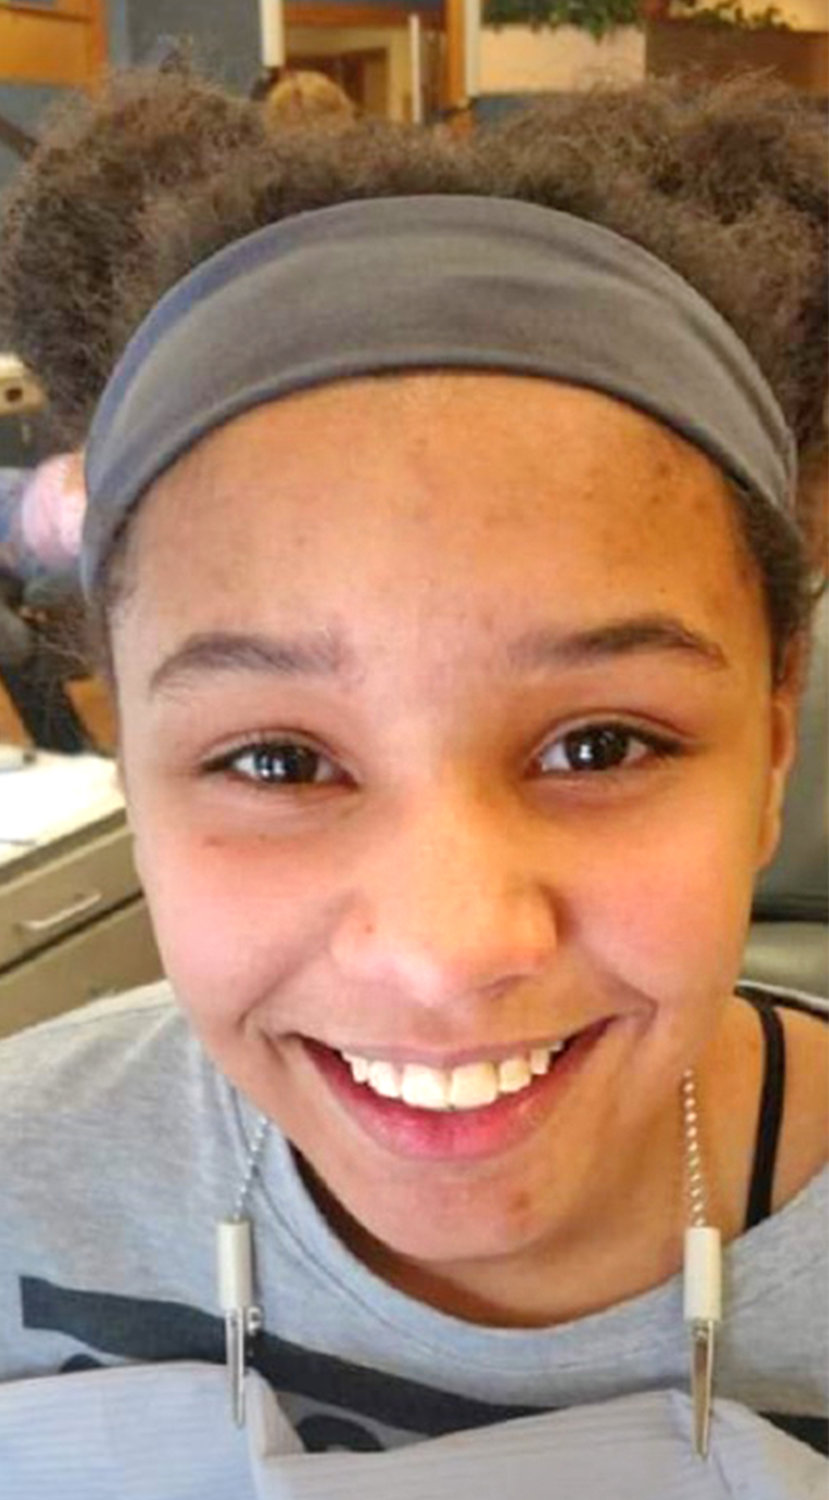 MISSING GIRL — Kaylee Anderson, age 16, has been missing from her home in New York Mills since Dec. 7. Anyone with information on her whereabouts is asked to call police at 315-736-6623.